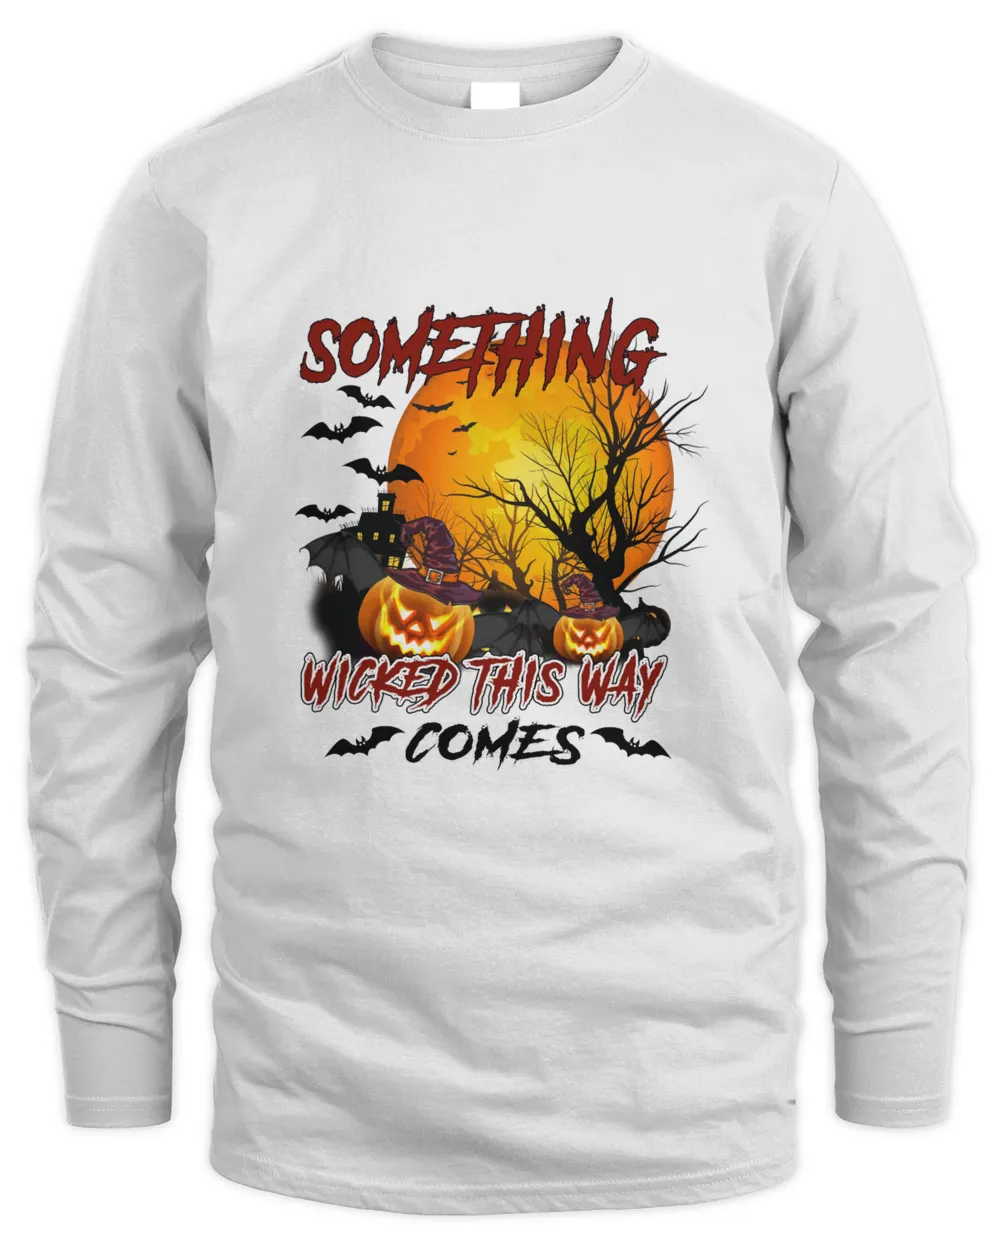 Something Wicked This Way Comes V-Neck T-Shirt, black bats blood moon pumpkin